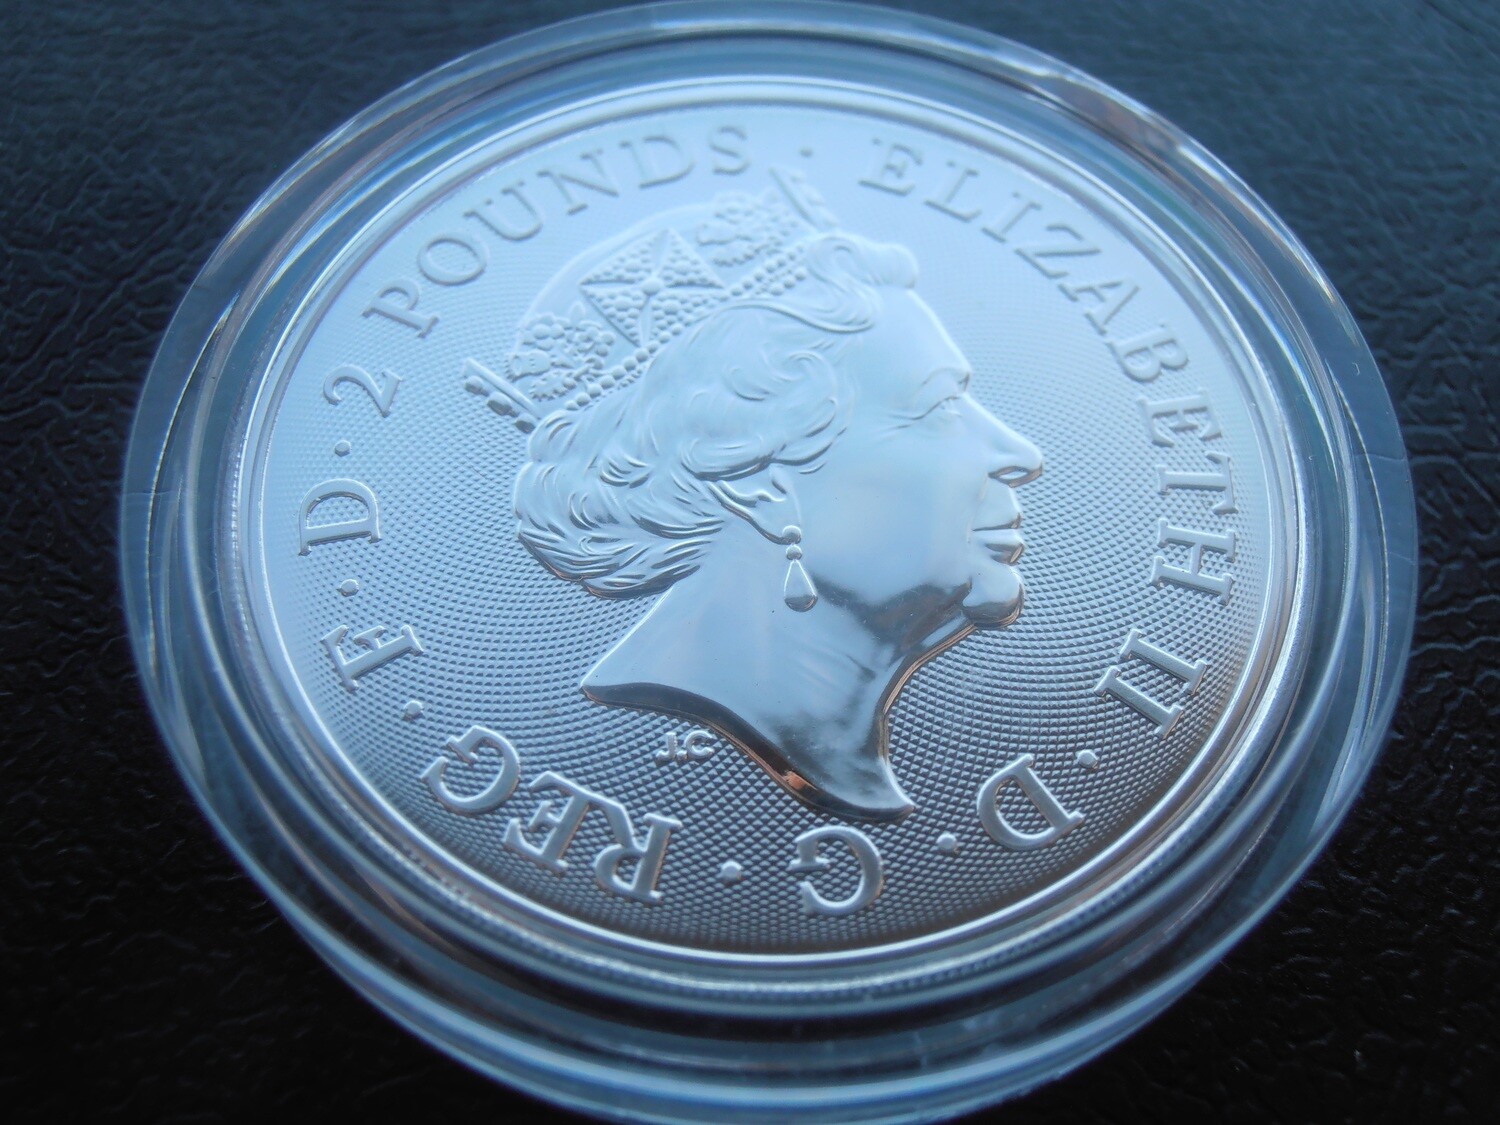 2019 - Two Pound Fine Silver (Year of the Pig)